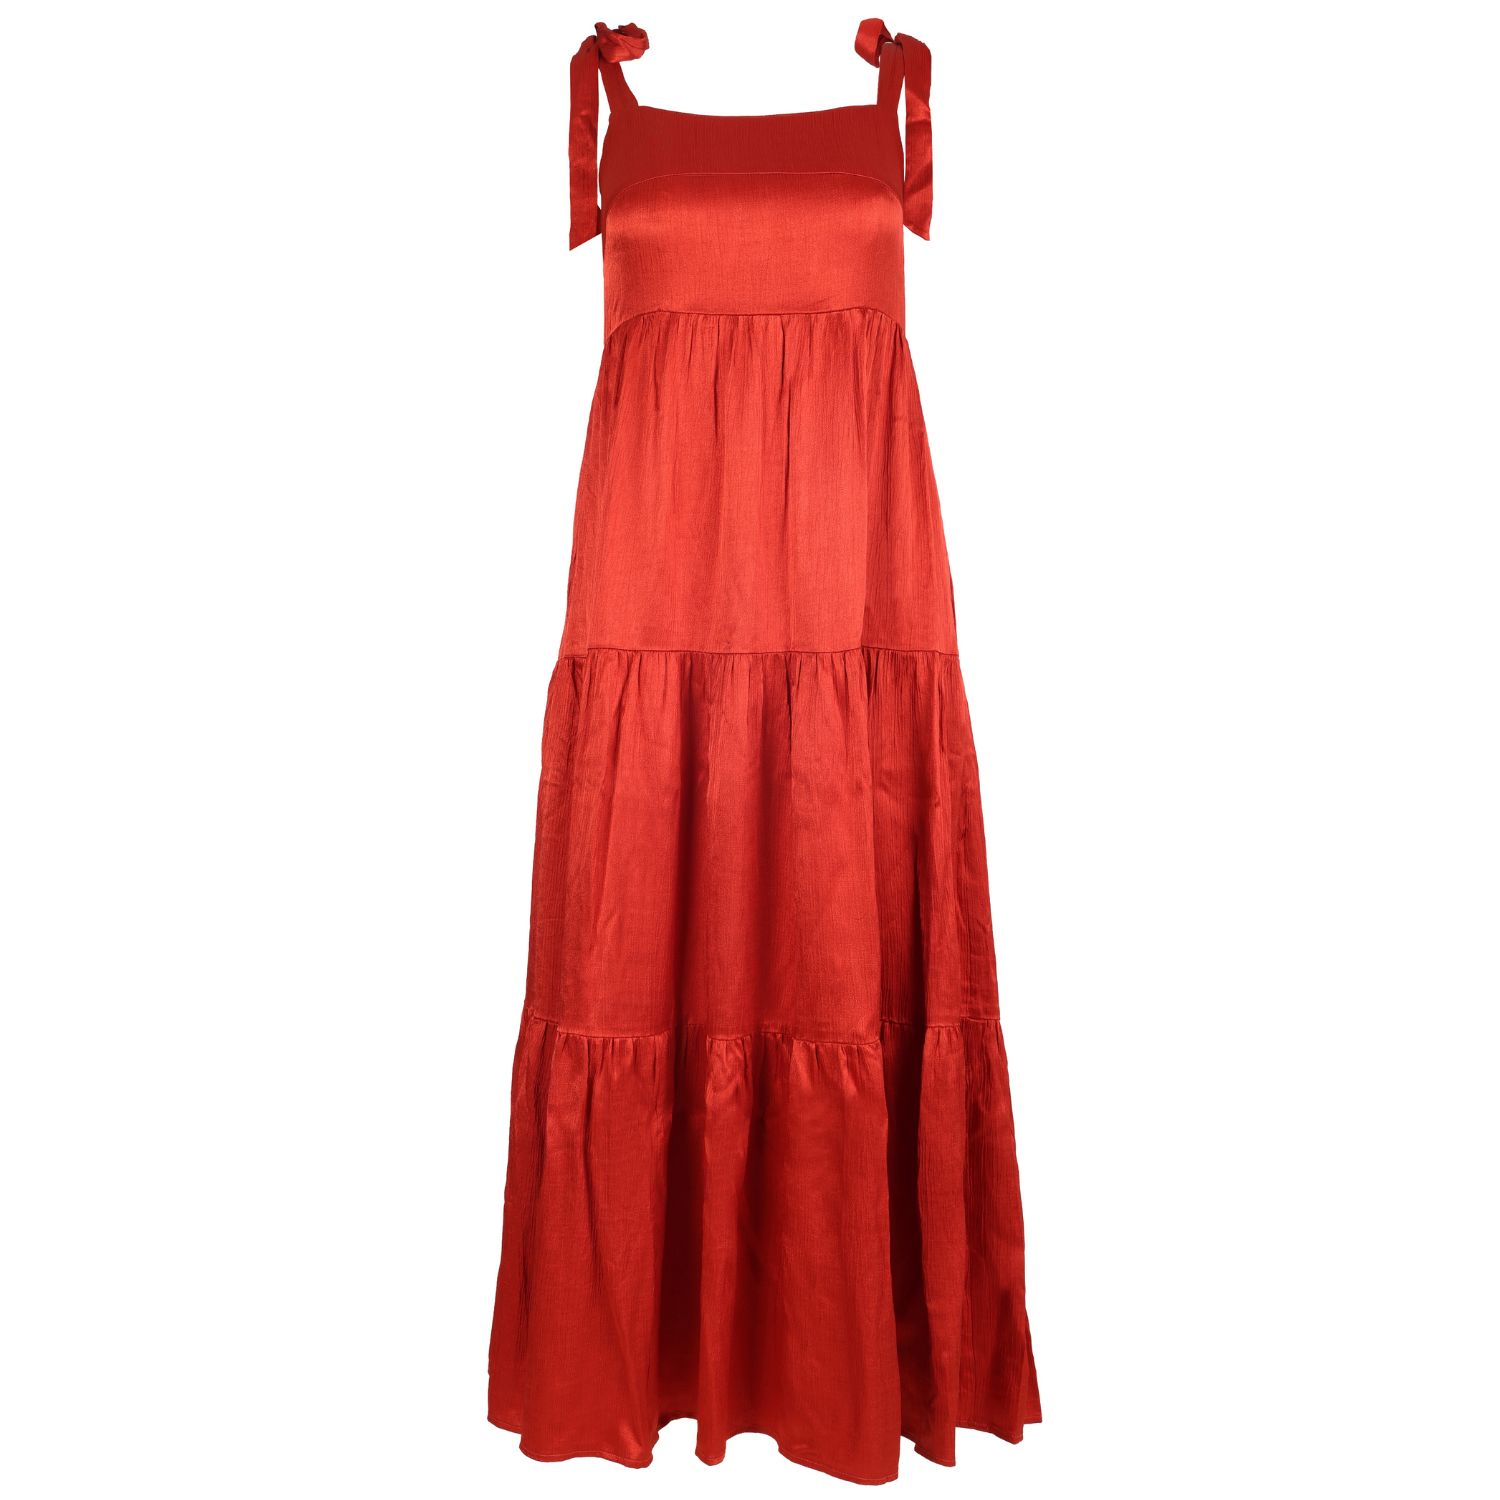 Traffic People Women's Red Breathless Lily Dress